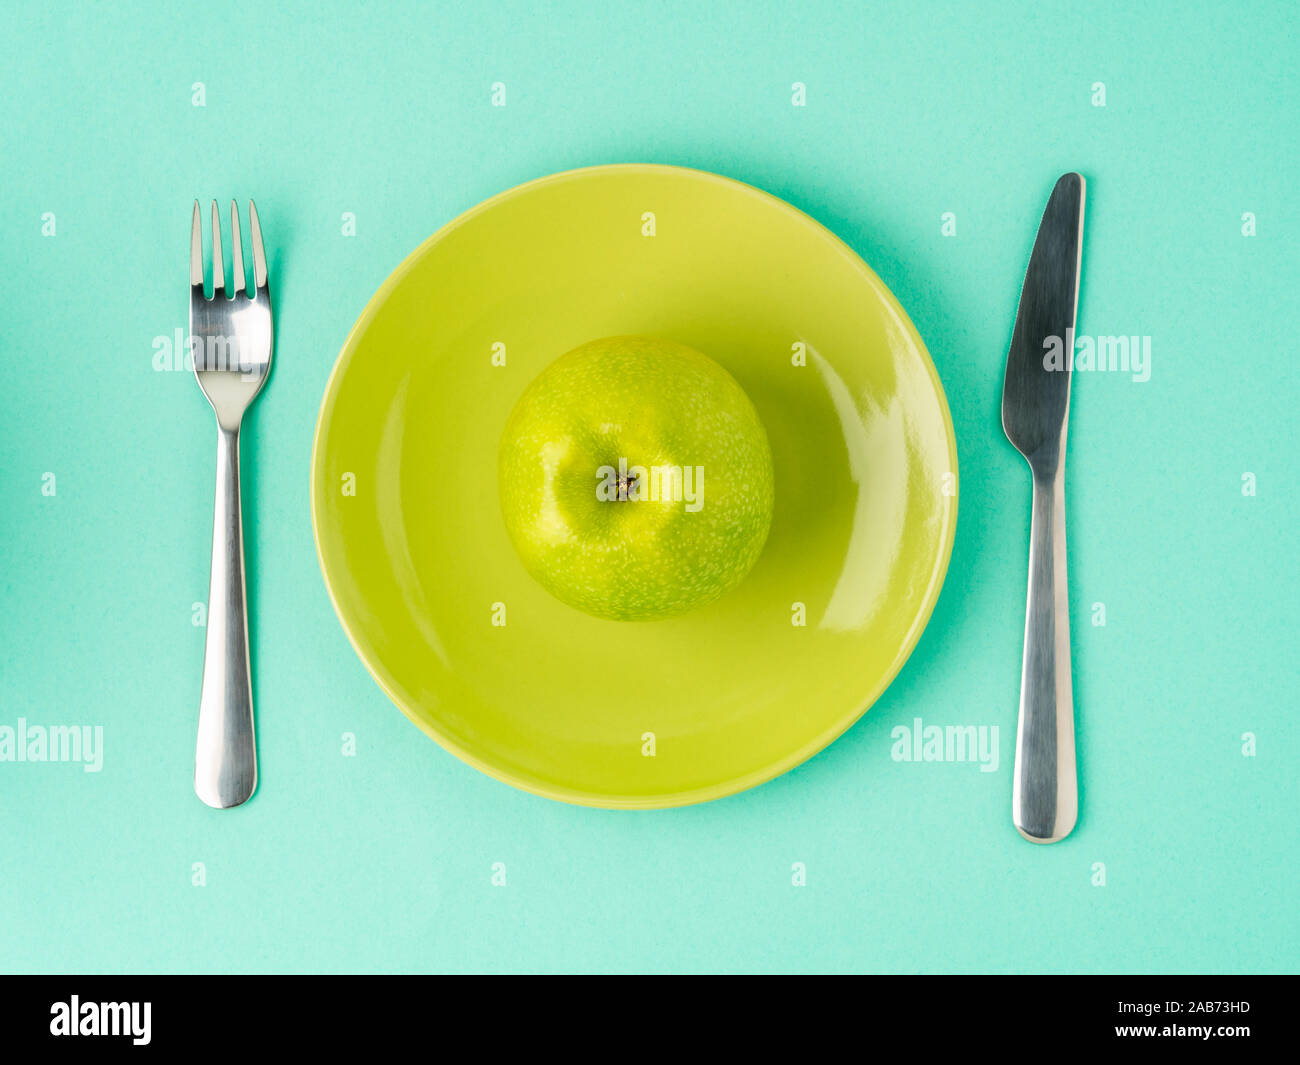 Ripe raw juicy green Apple on a yellow plate, fork, knife on a bright turquoise blue colour table, top view. Diet as a lifestyle. Stock Photo